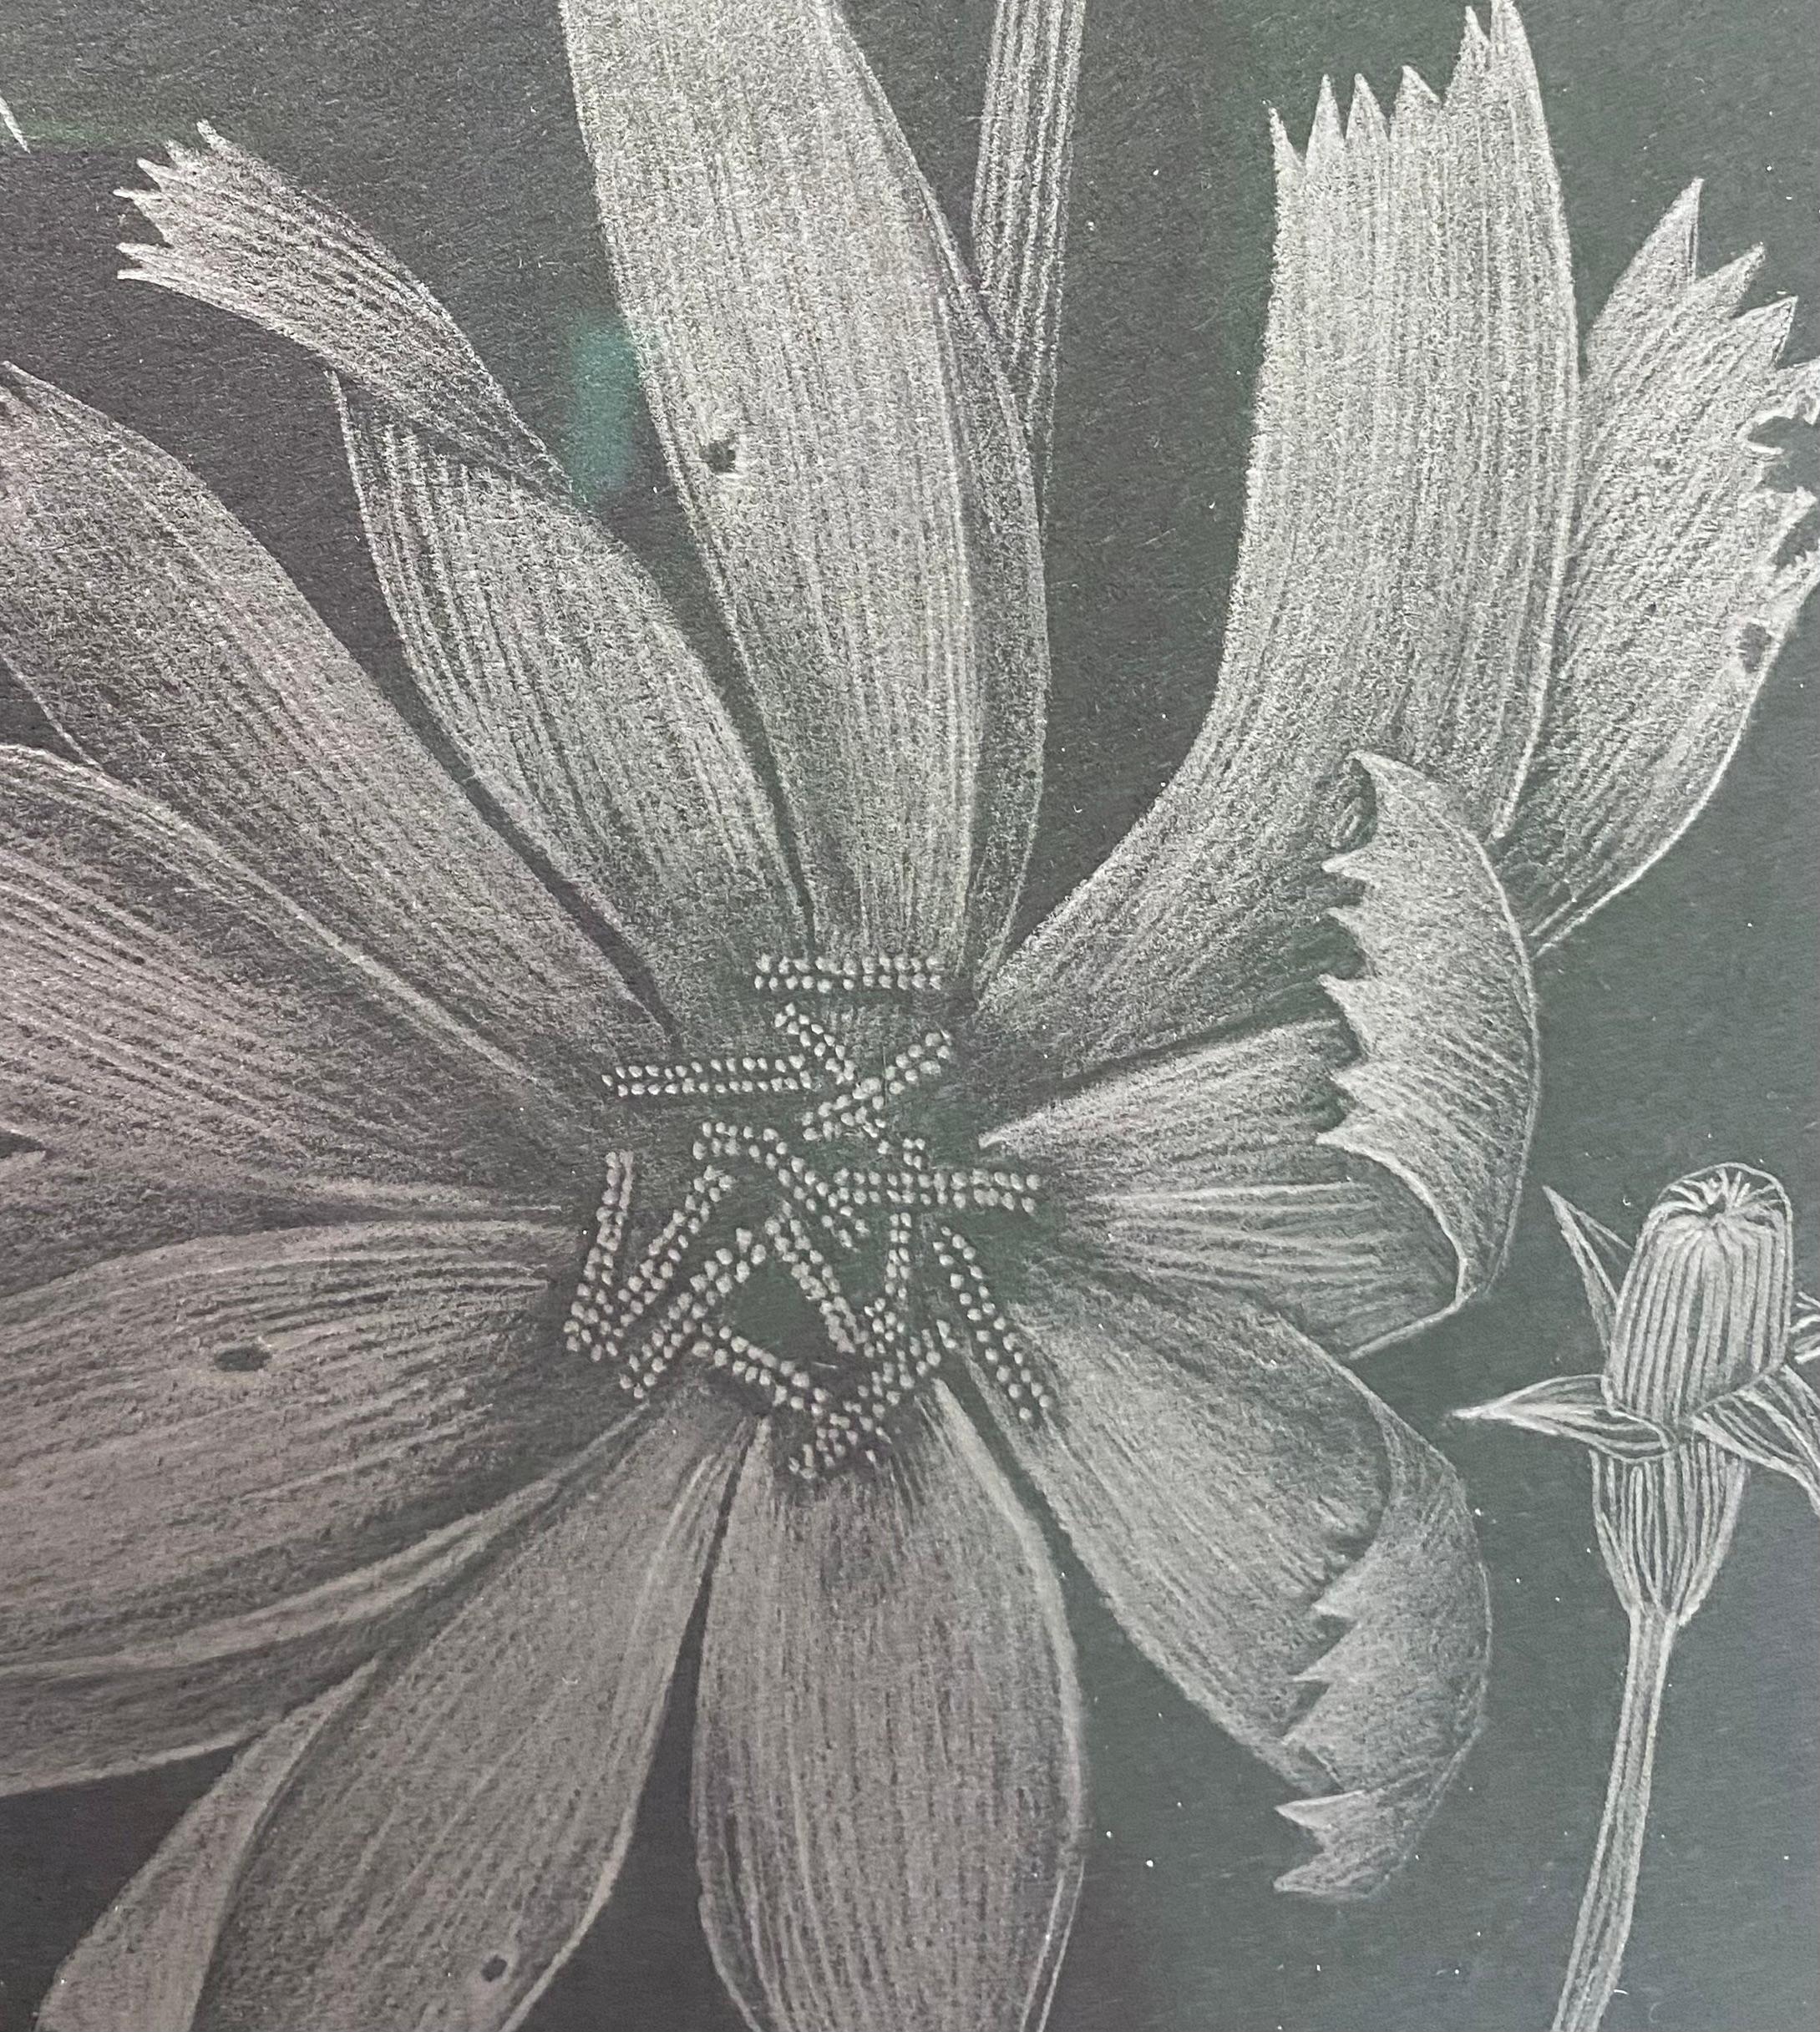 Chicory Two, Botanical Drawing on Black, Metallic Silver Flowers, Leaves, Buds 1